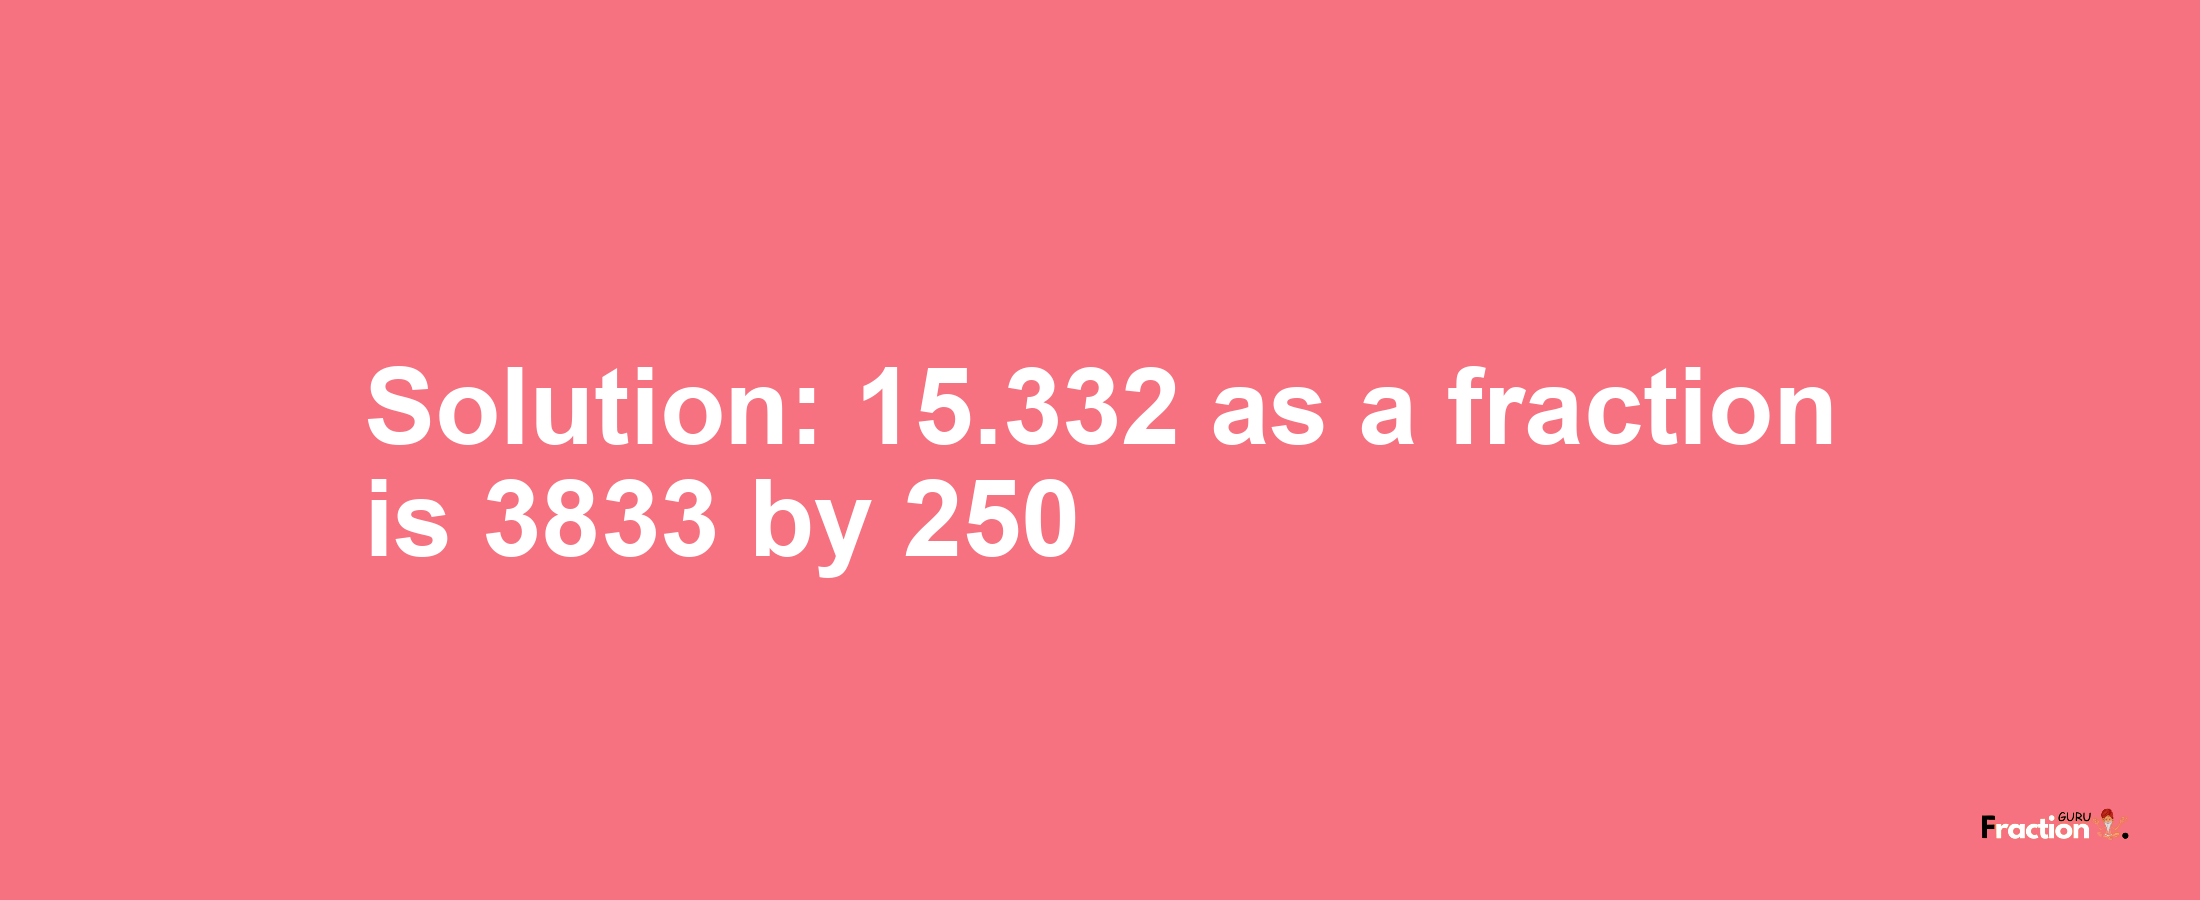 Solution:15.332 as a fraction is 3833/250